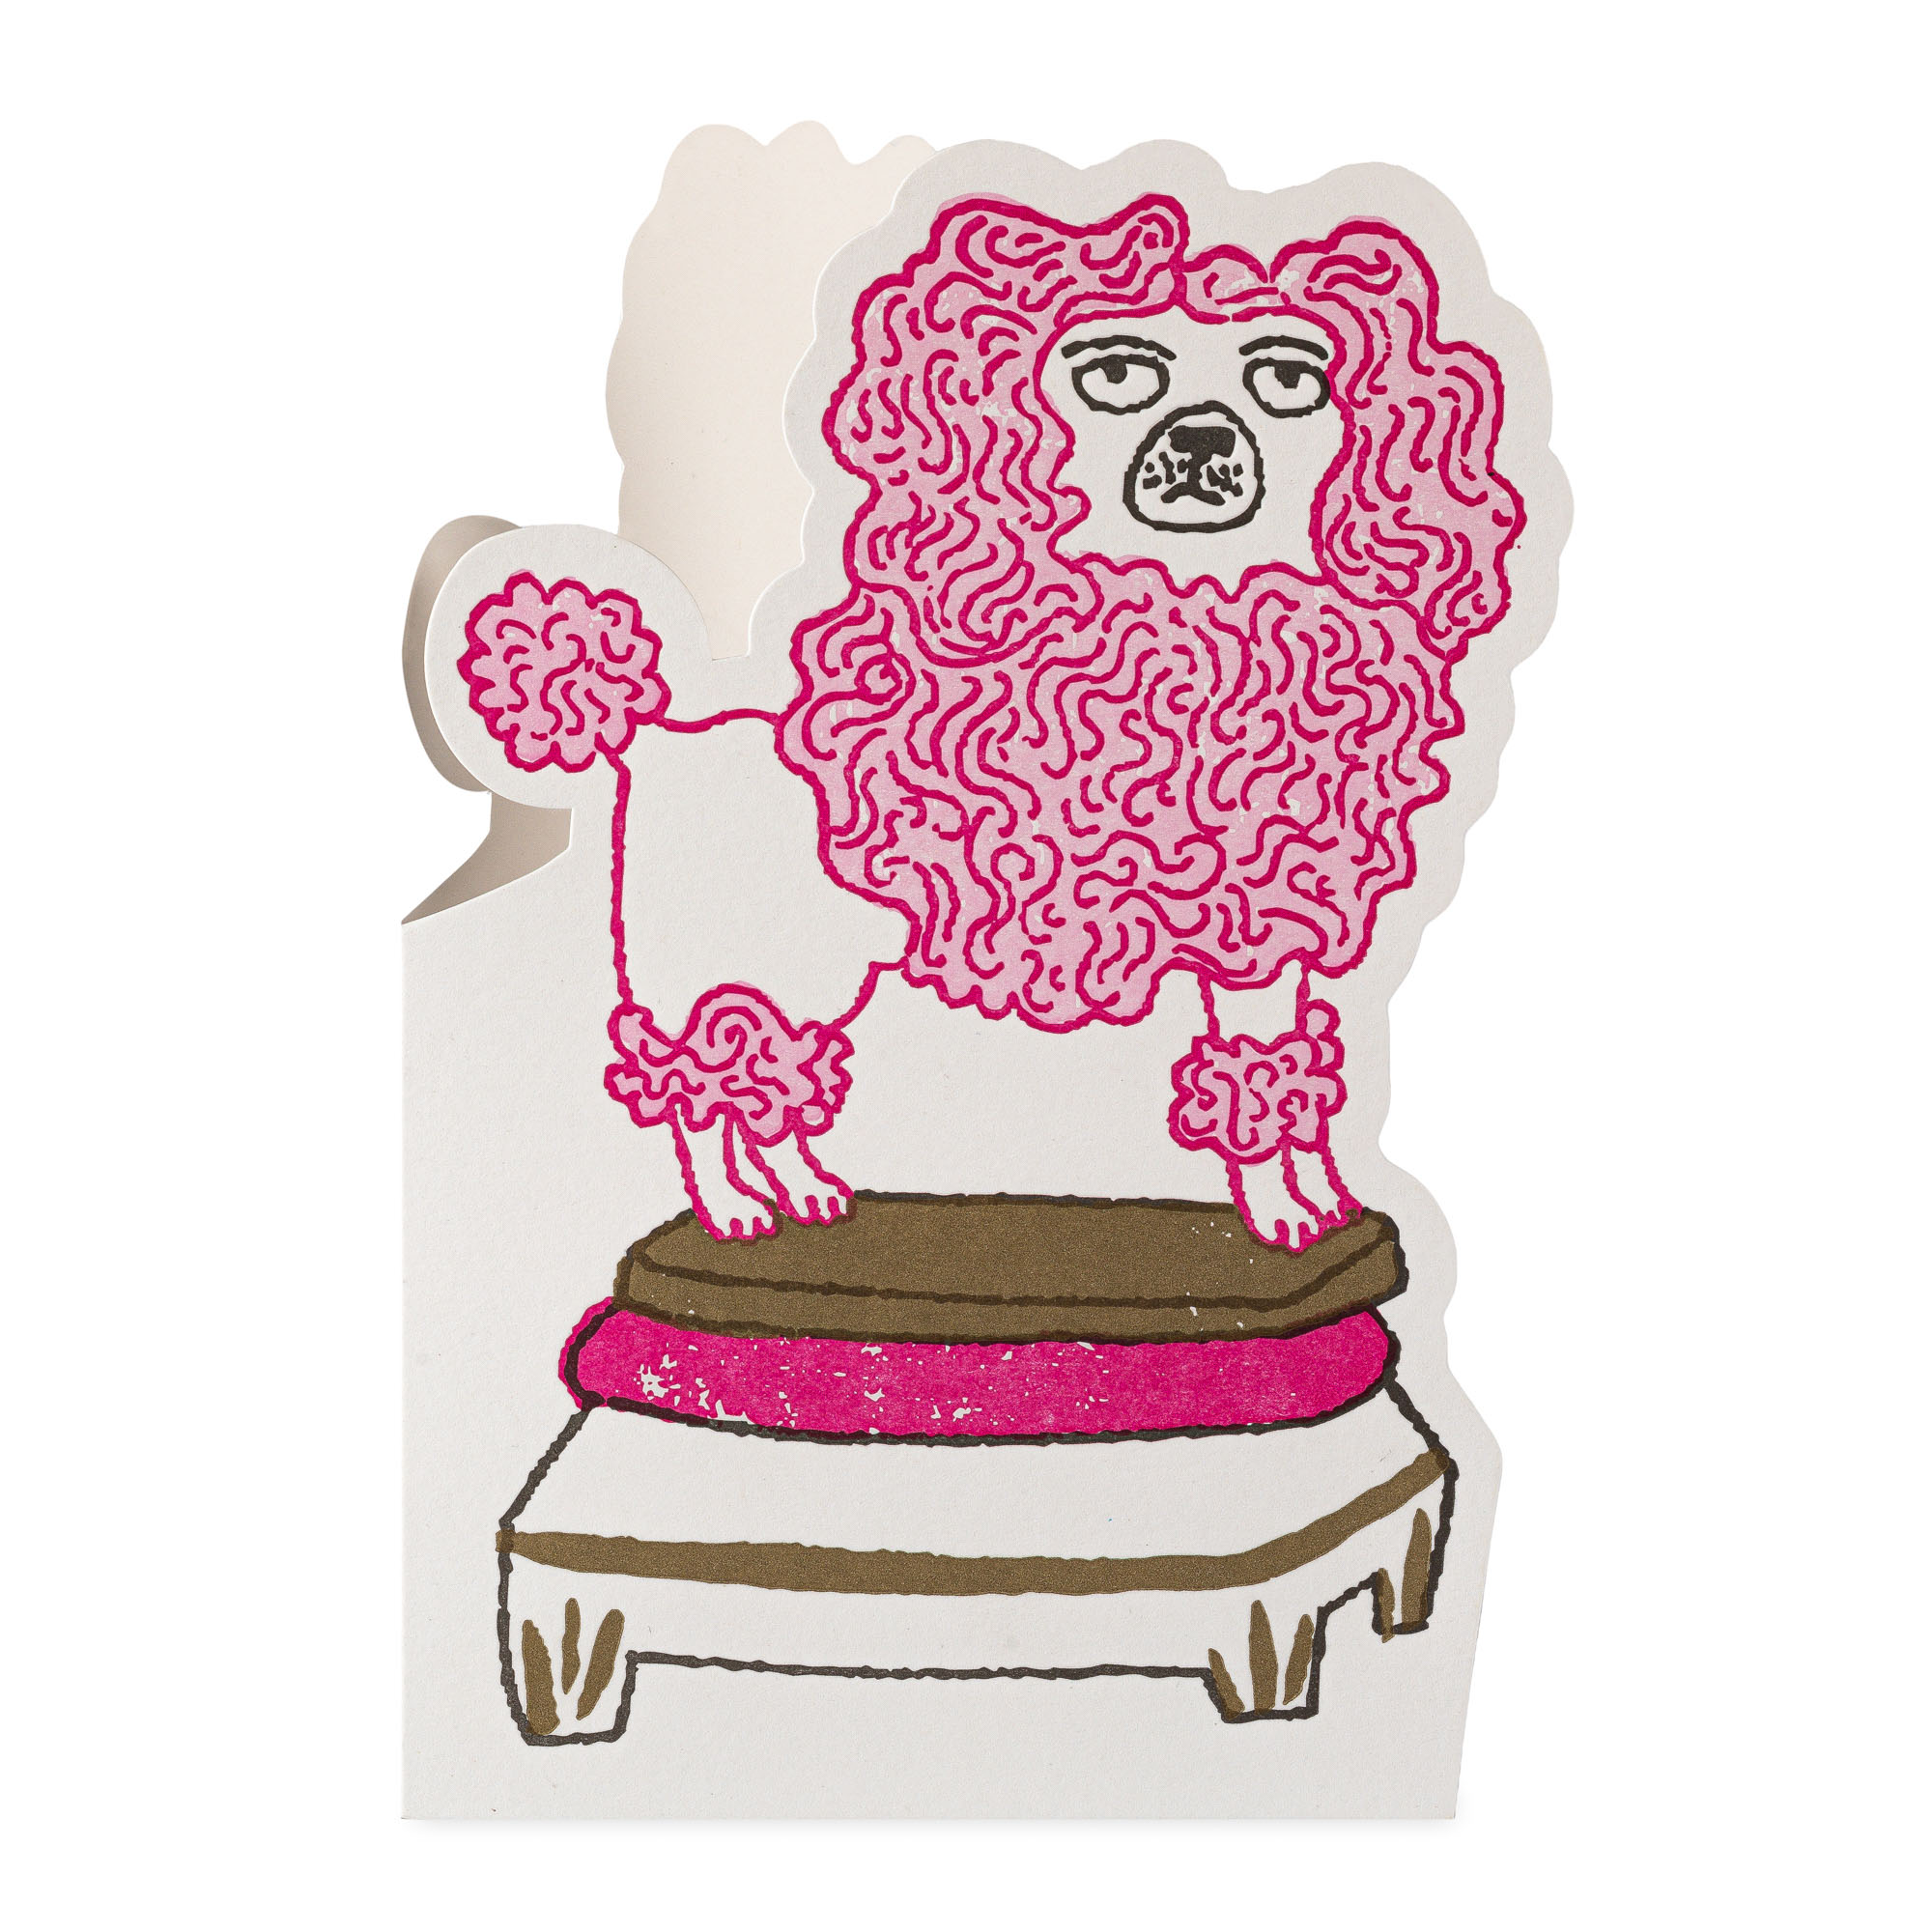 Poodle - Cut-out Cards - Charlotte Farmer - from Archivist Gallery 